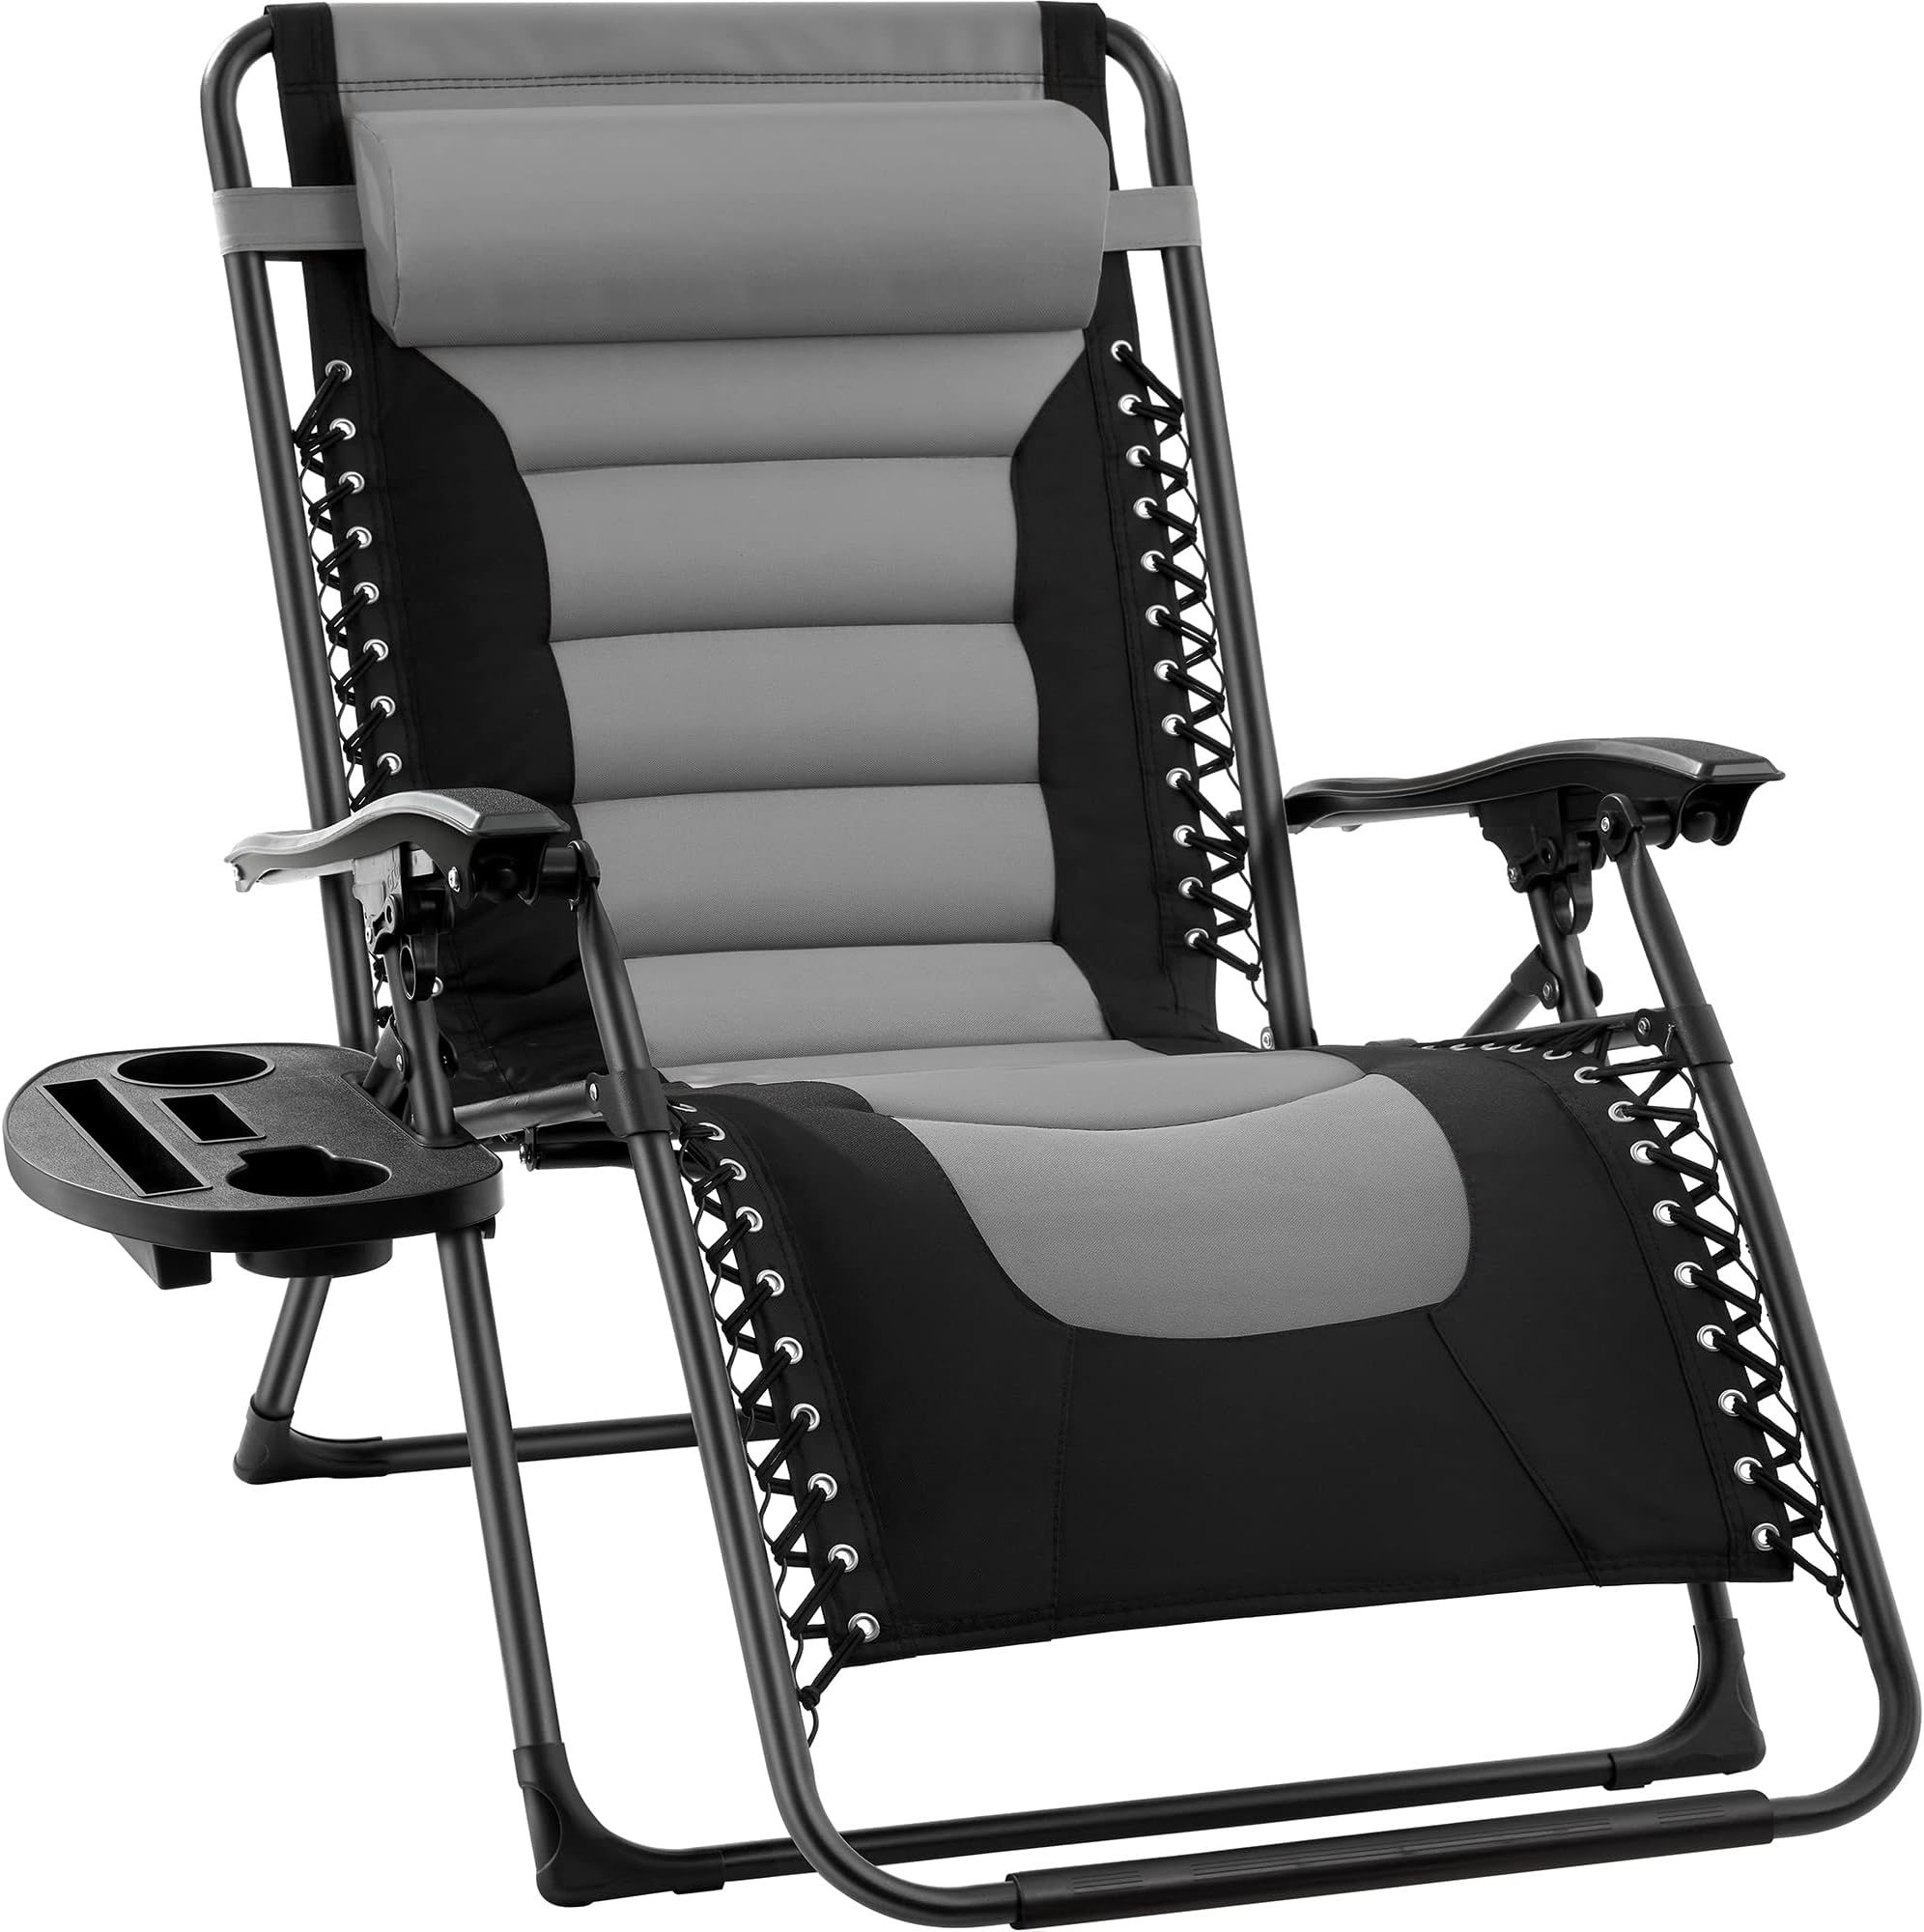 Best Choice Products Oversized Padded Zero Gravity Chair, Folding Outdoor Patio Recliner, XL Anti Gravity Lounger for Backyard w/Headrest, Cup Holder, Side Tray, Polyester Mesh - Black/Gray | Amazon (US)